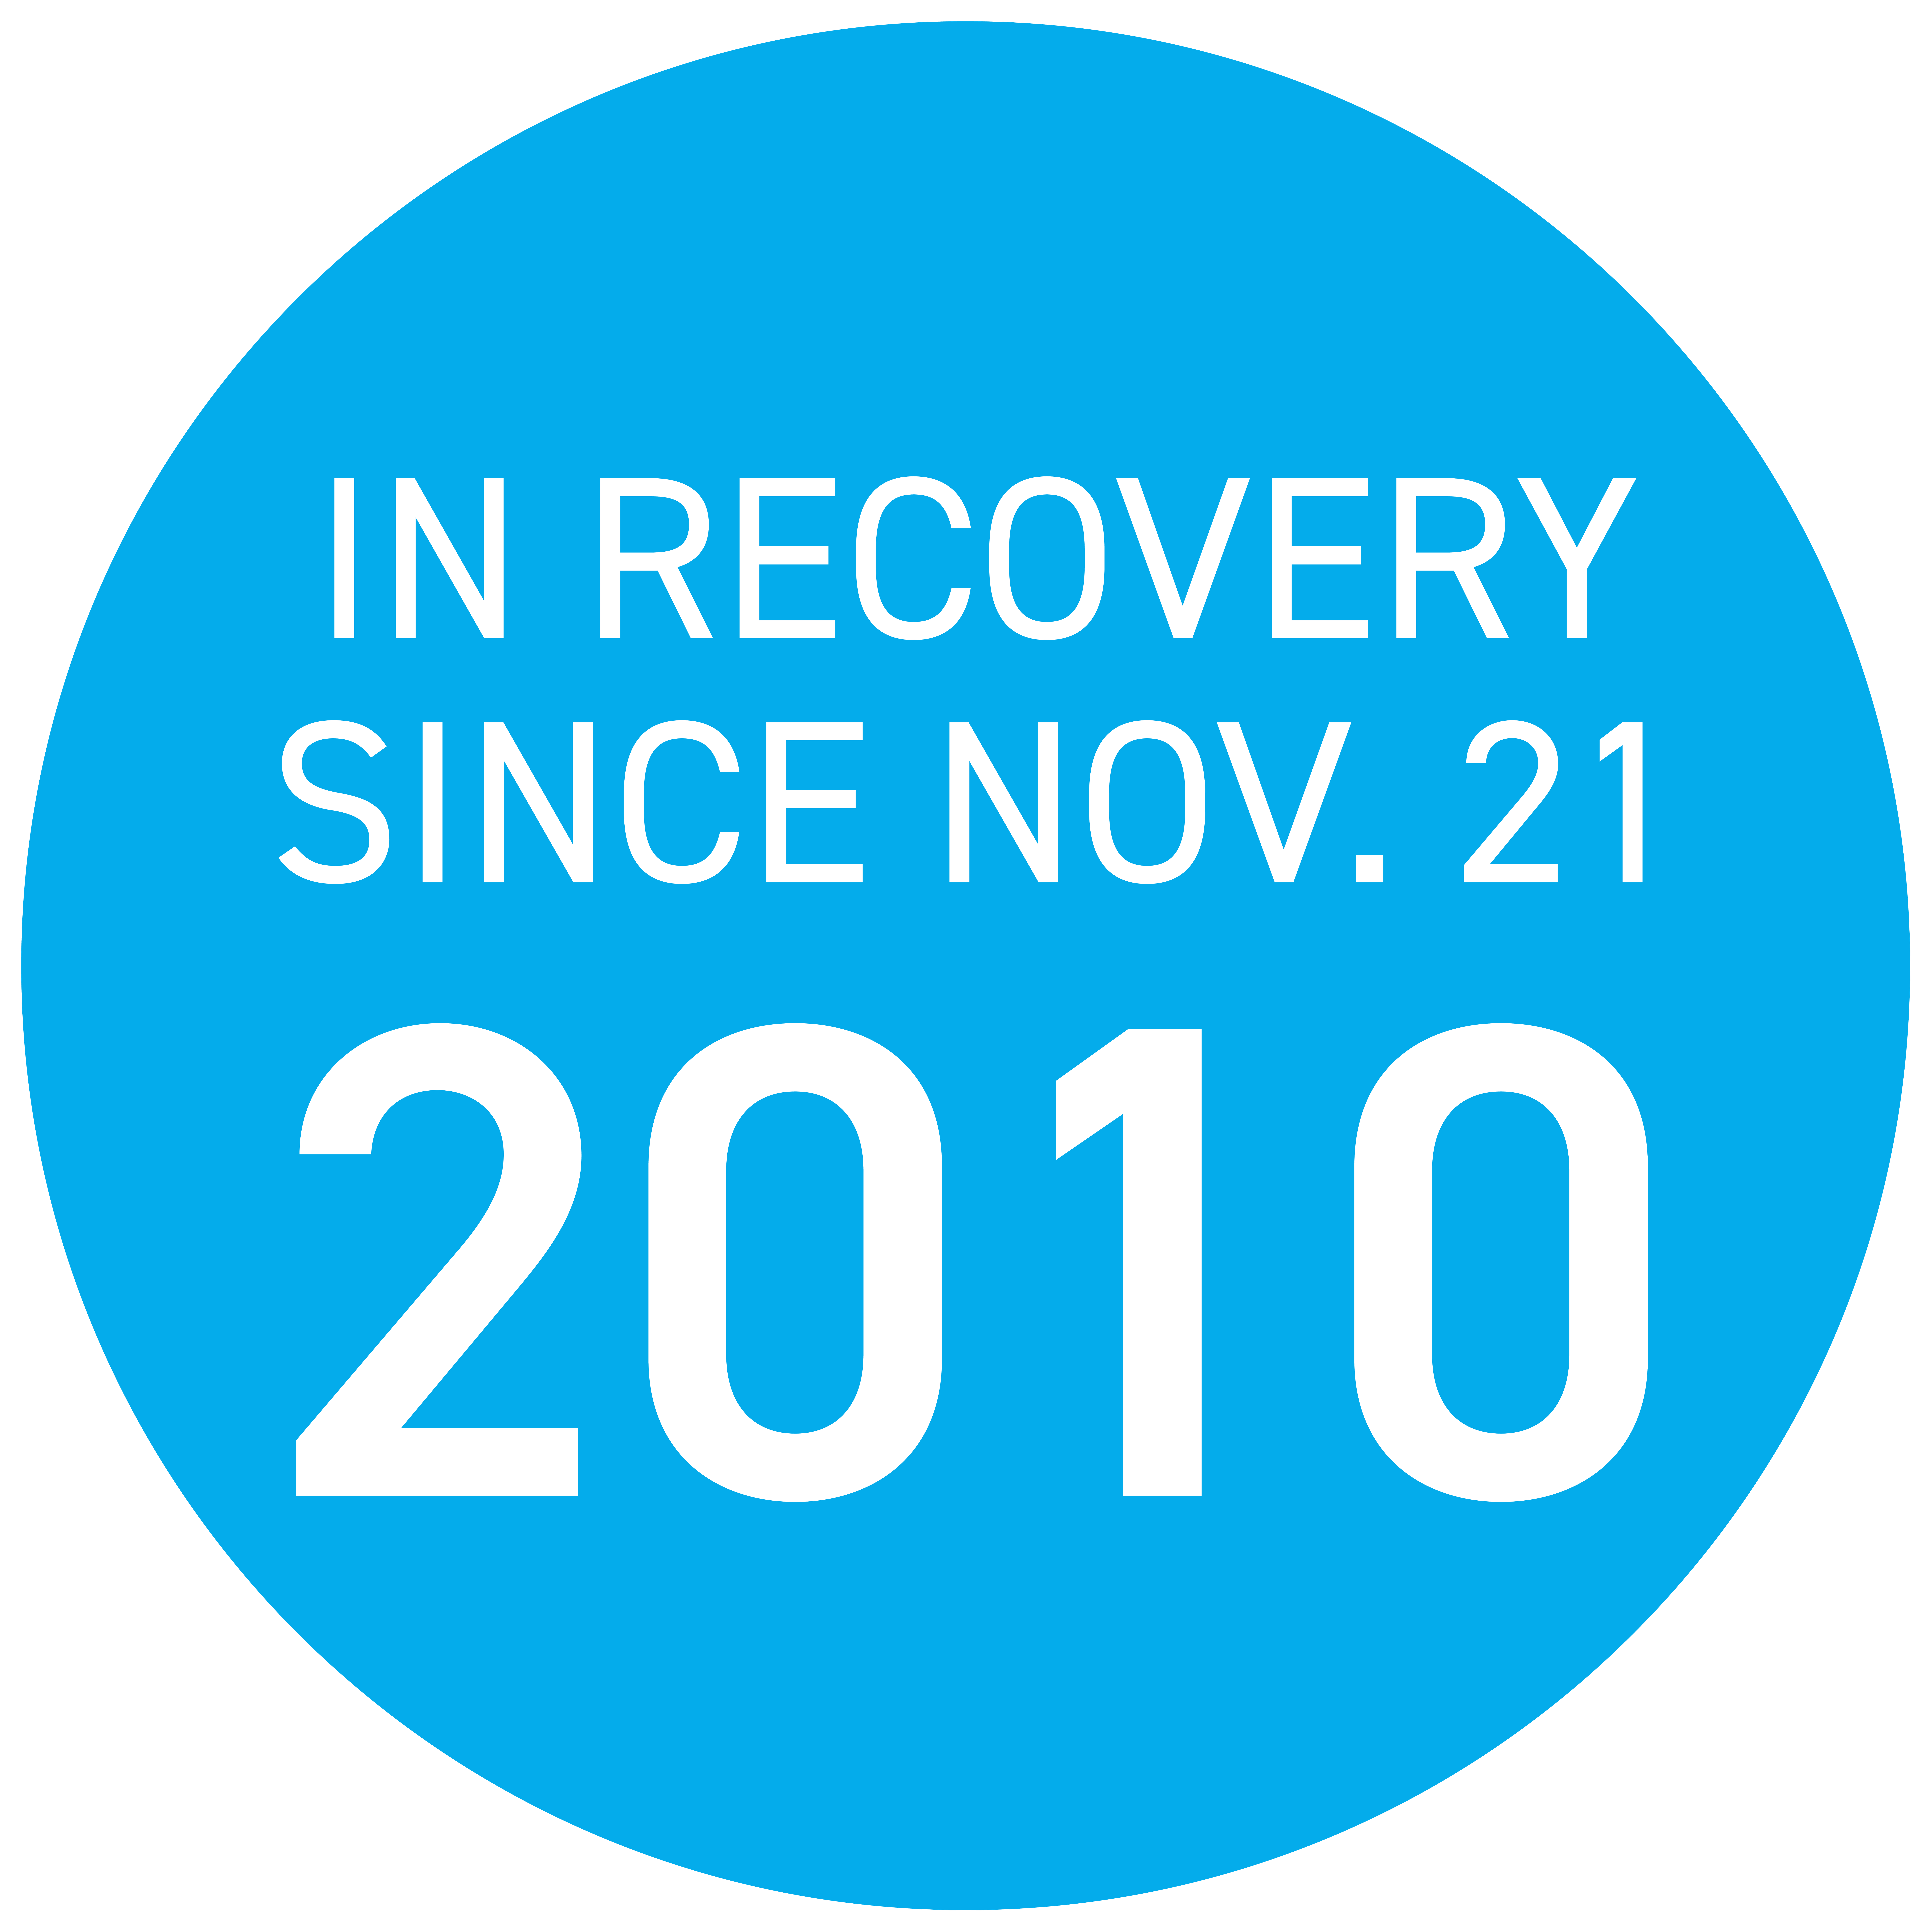 In recovery since November 21, 2010.